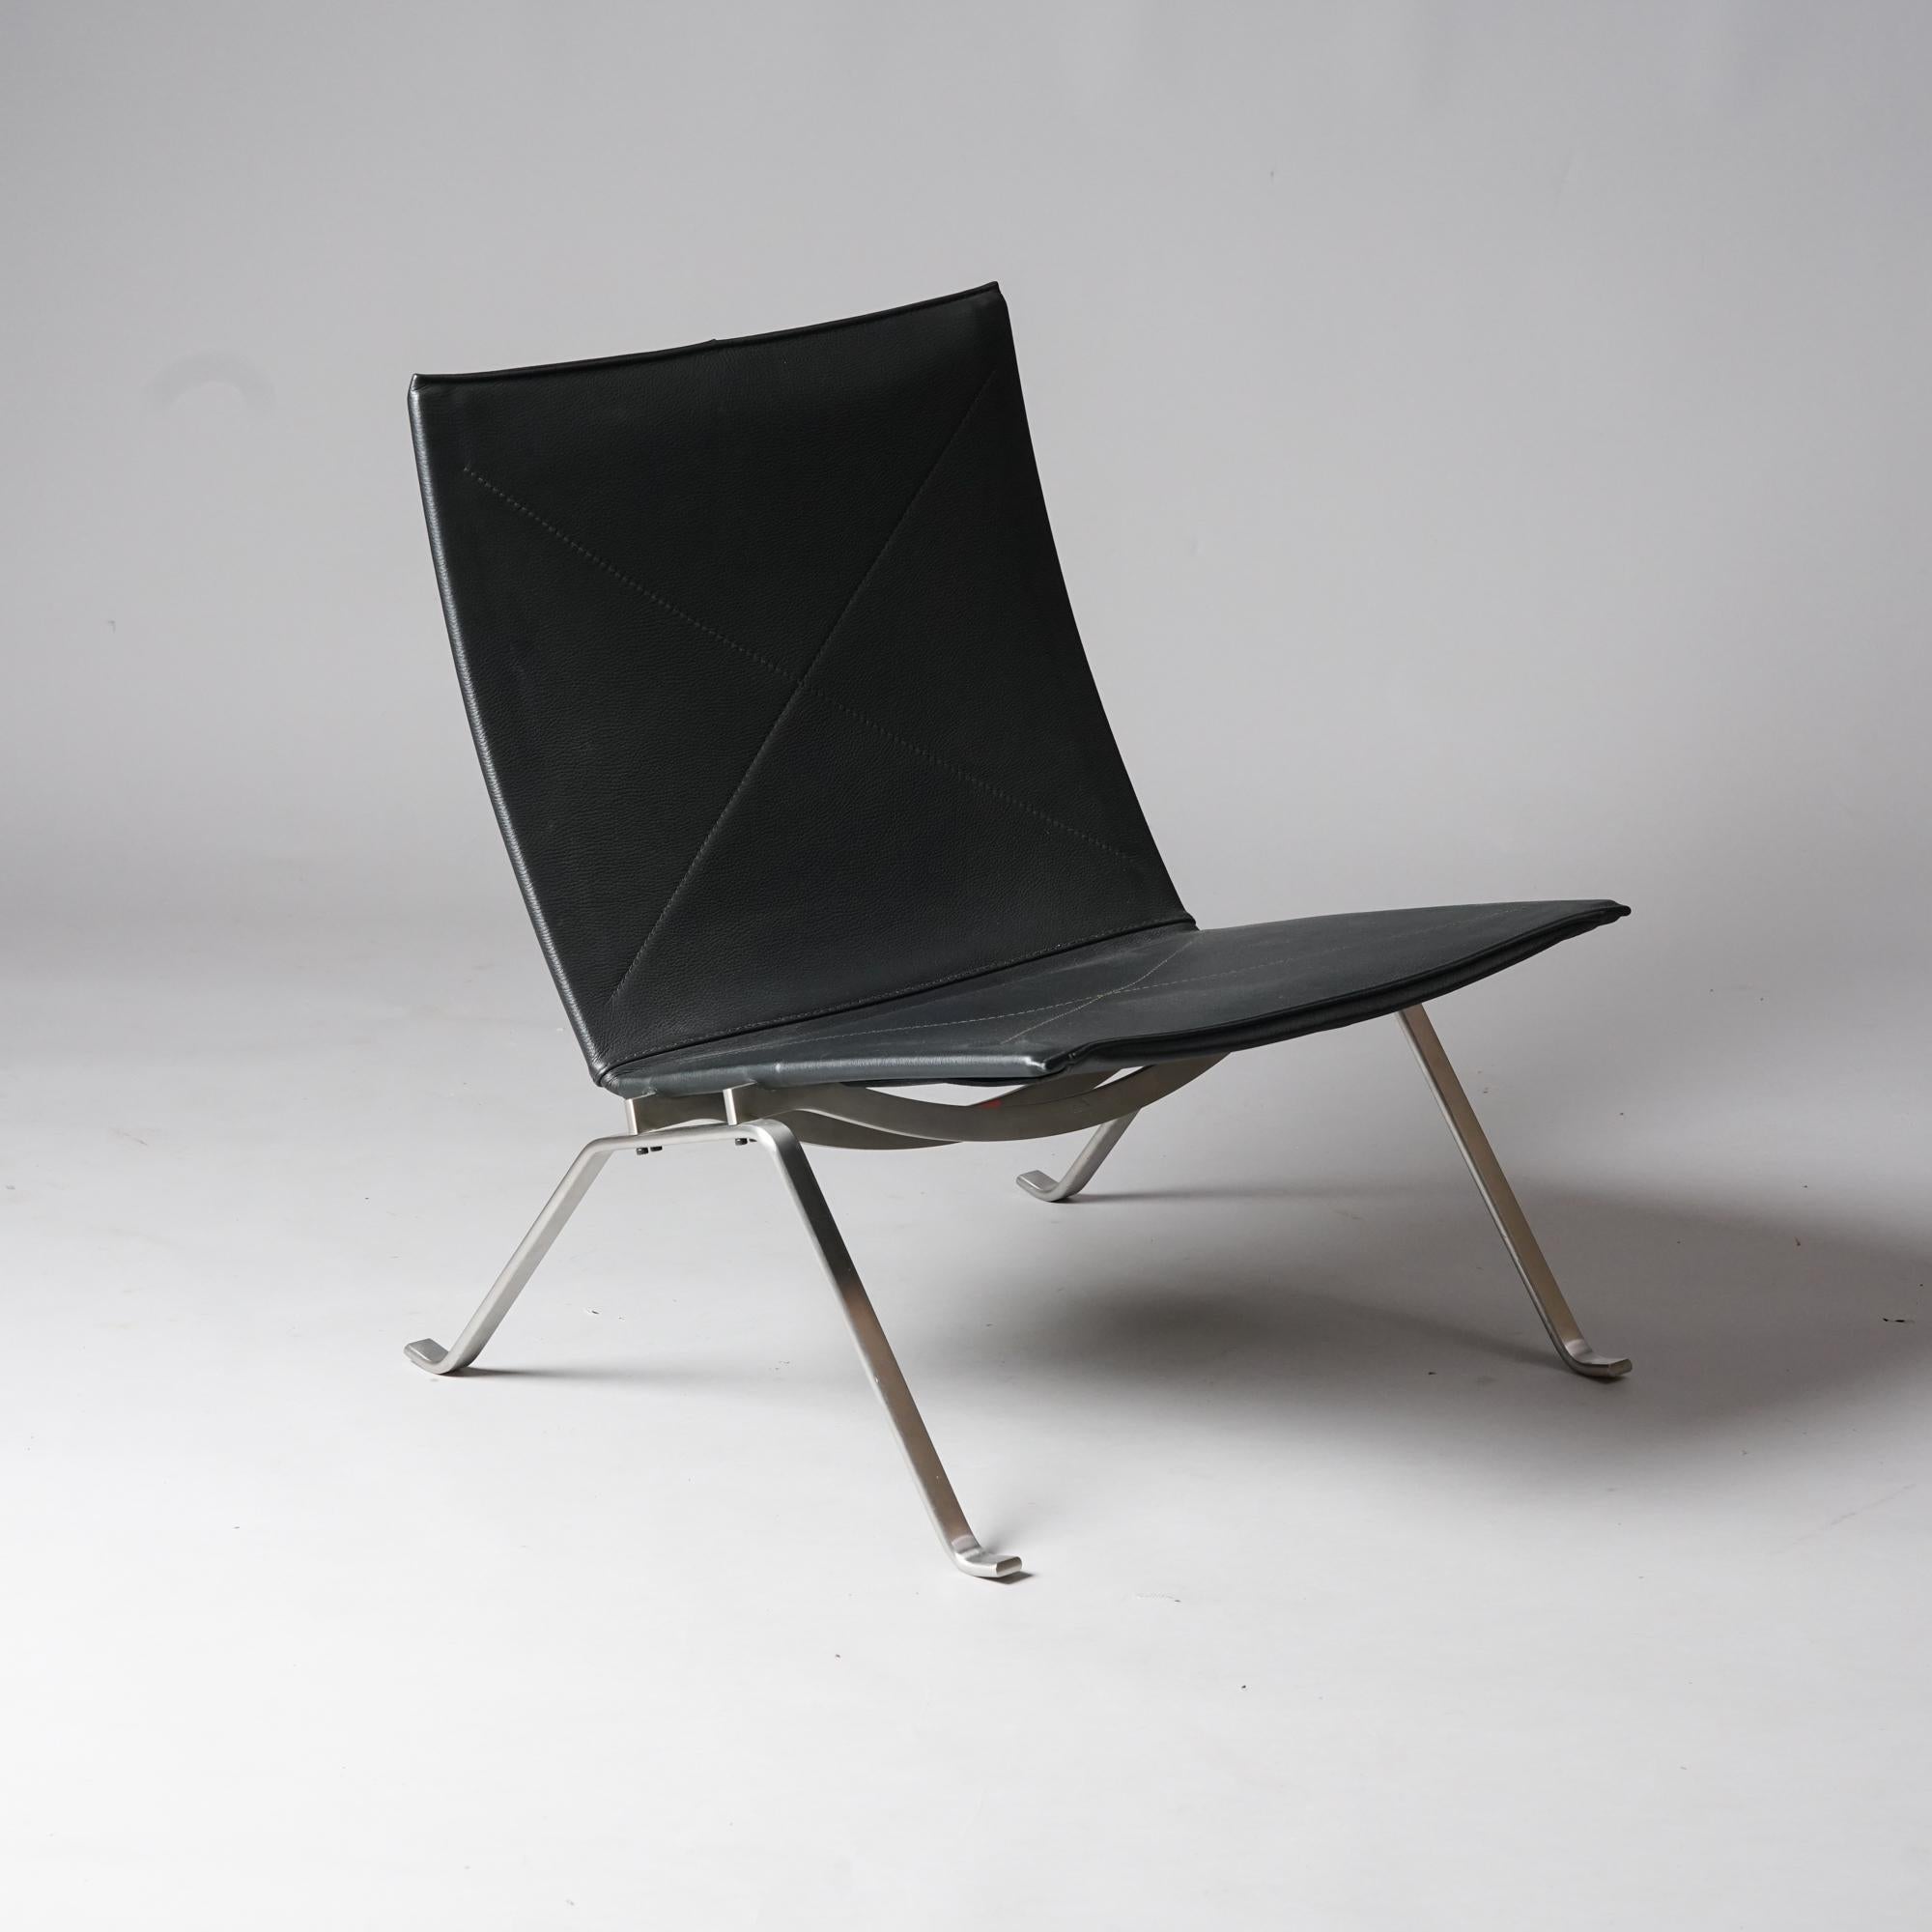 Mid-Century Modern PK22 chair is a classic designed by Poul Kjærholm for E. Kold Christiansen in 1955. This his example is a Fritz Hansen production, manufactured in 2008.